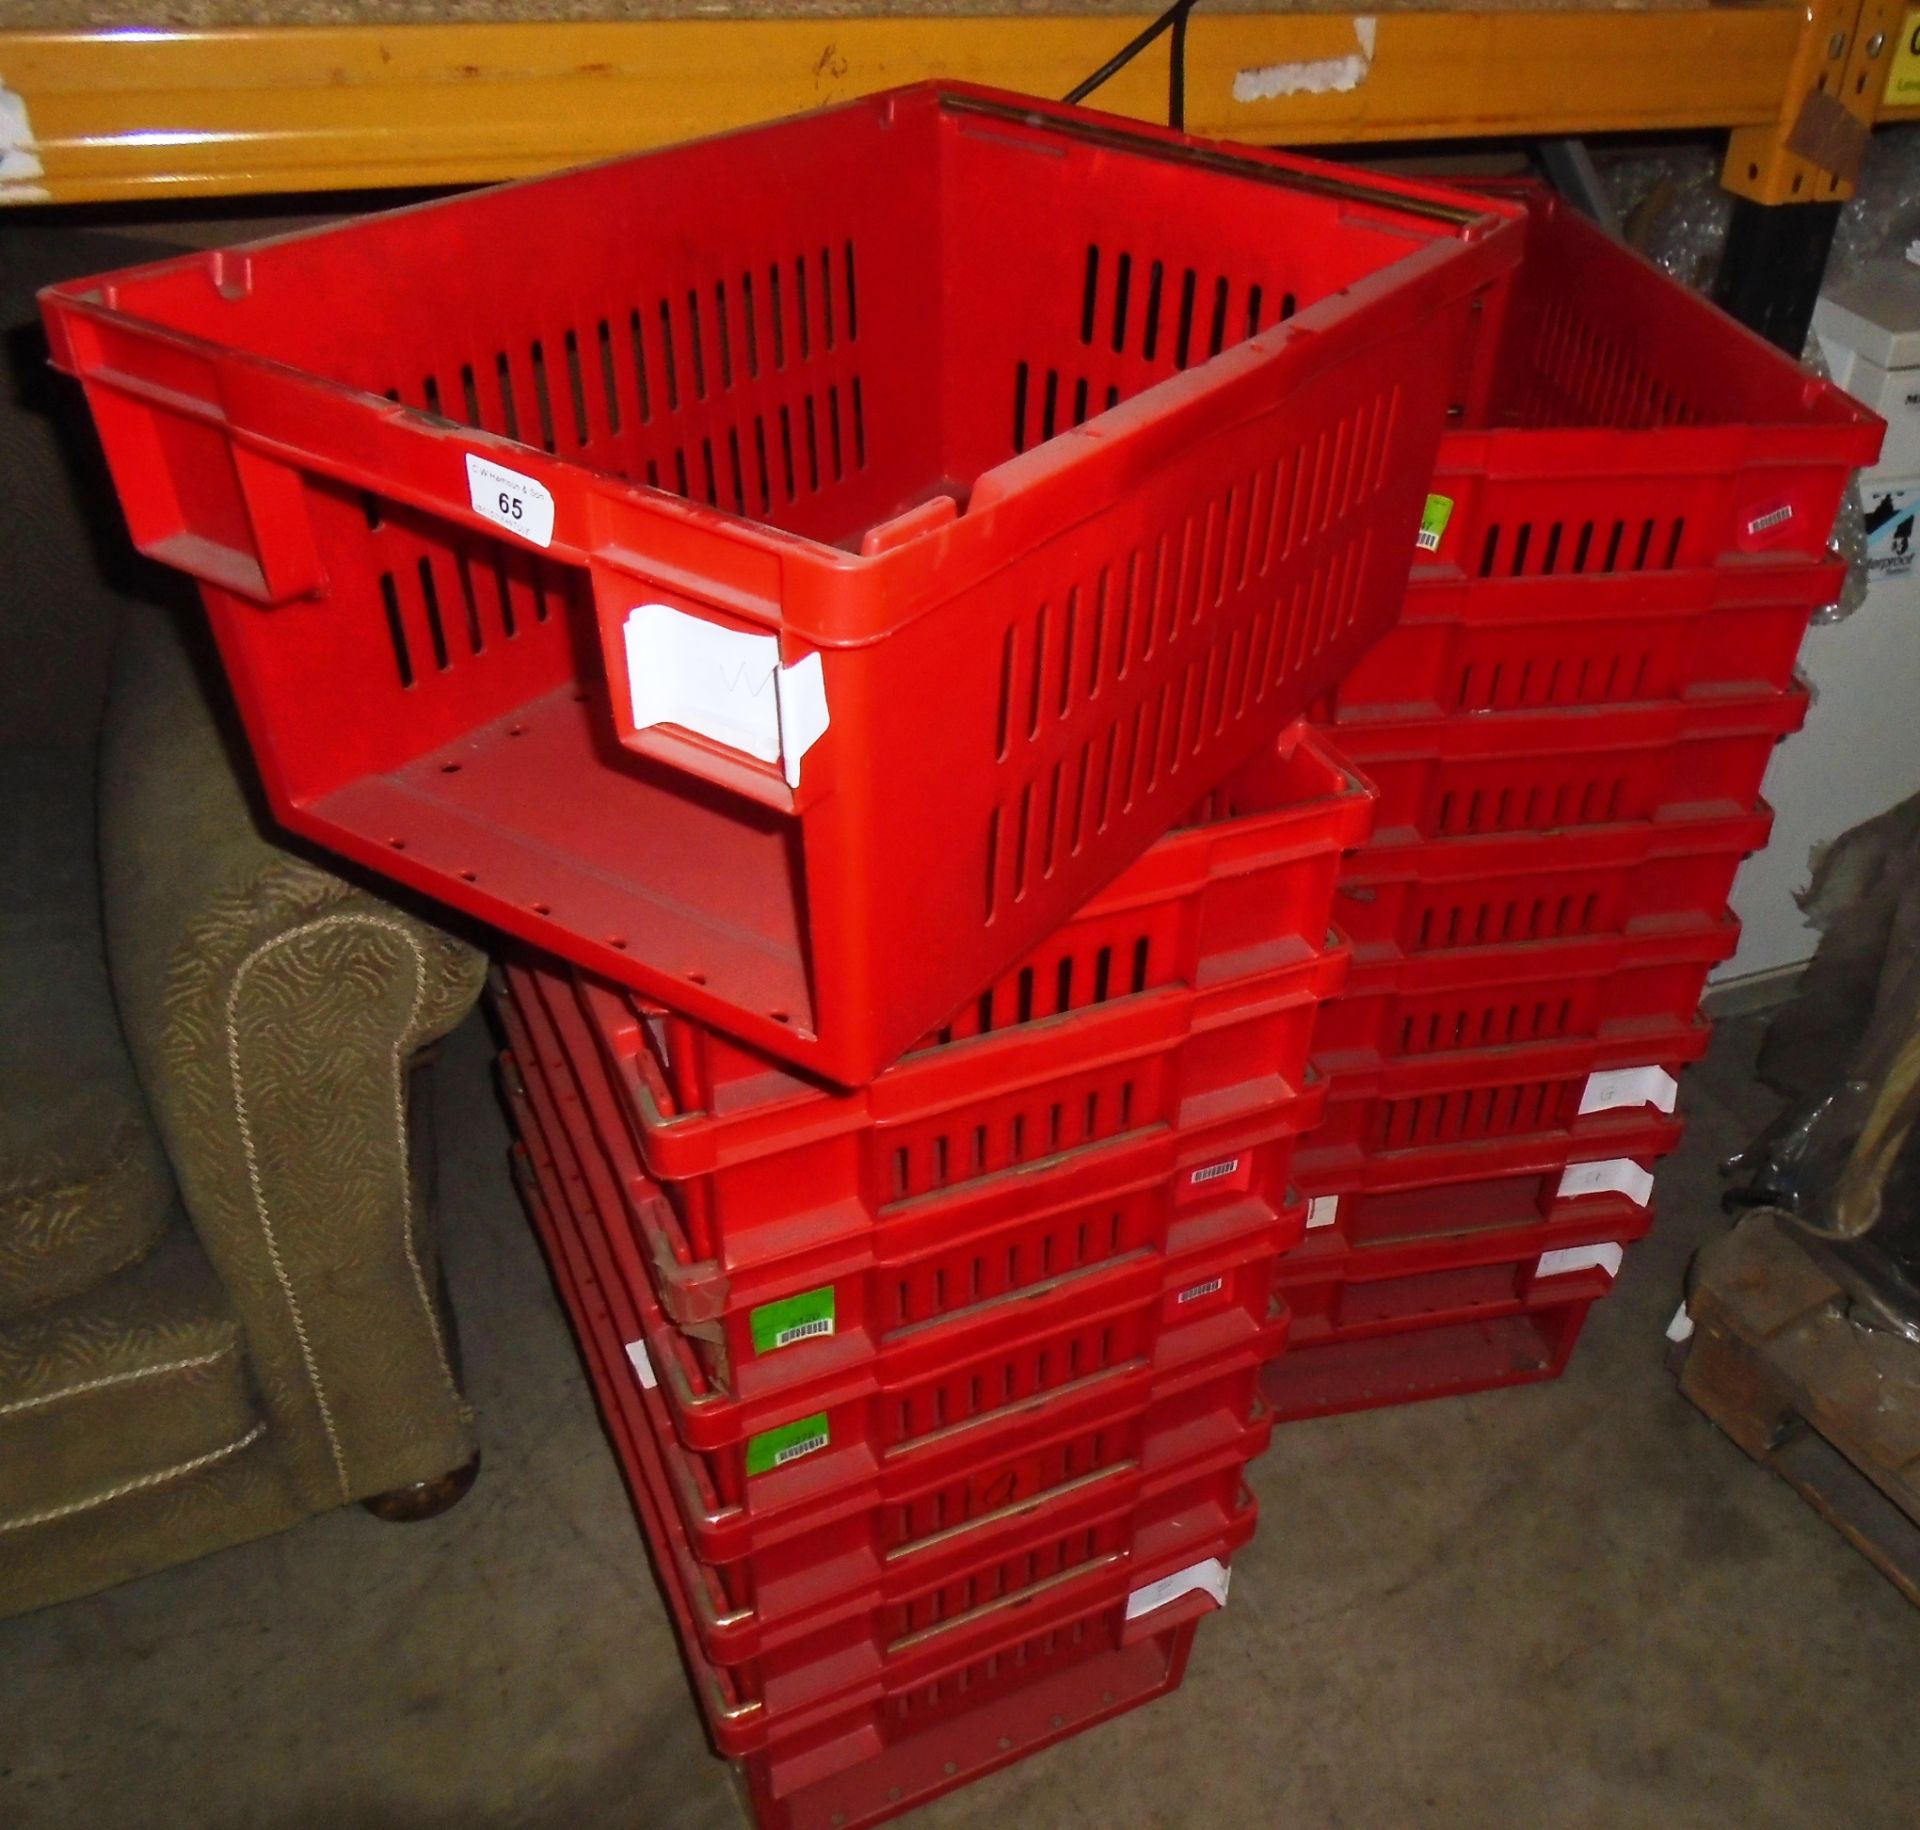 30 x red plastic storage stacking crates with open front display 40 x 60cm